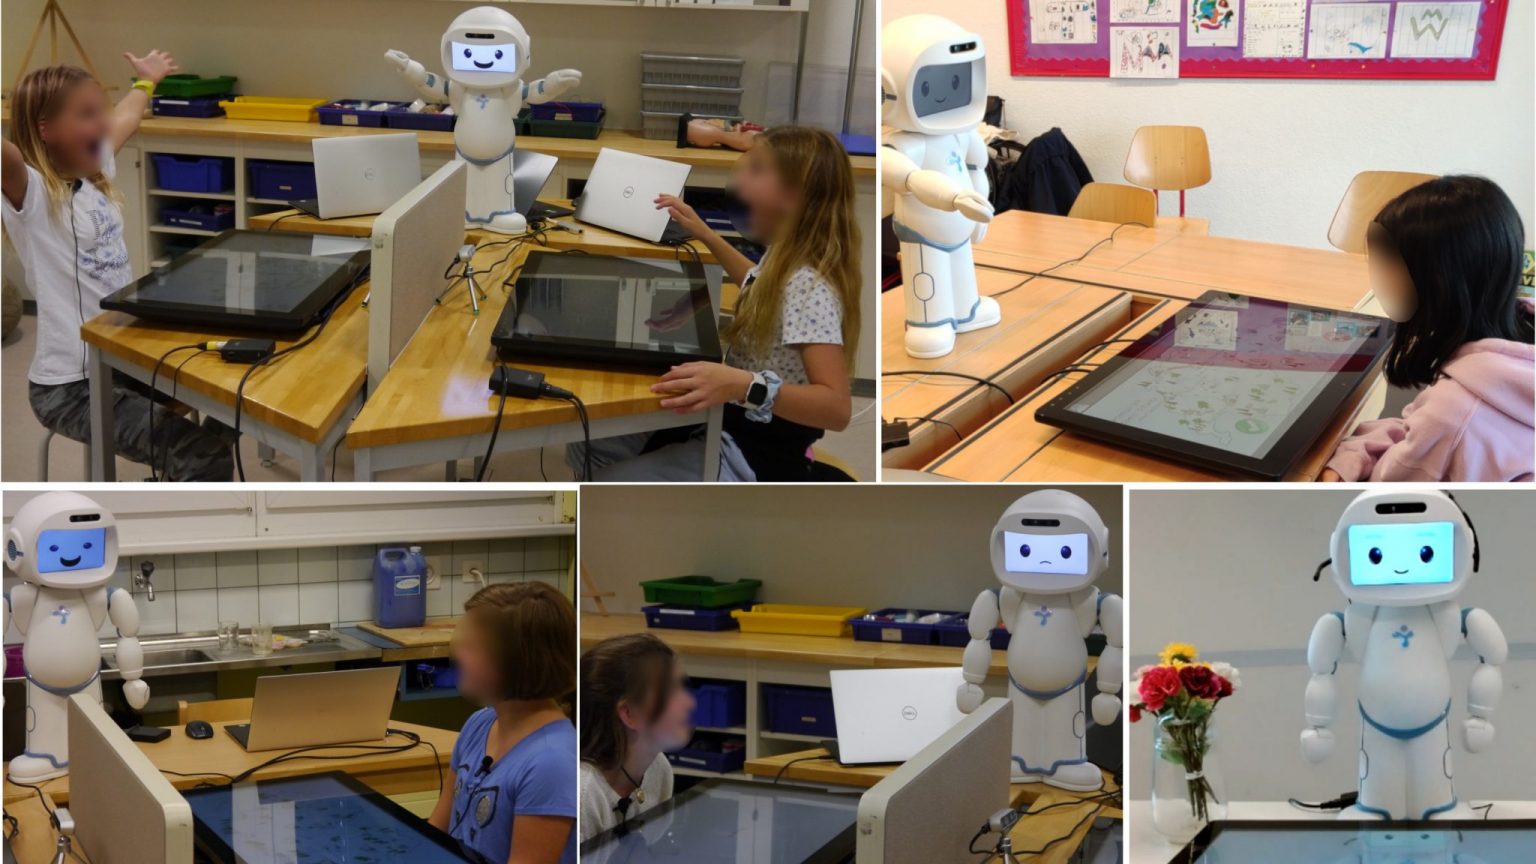 Example scenes of children and the robot participanting in the JUSThink activities